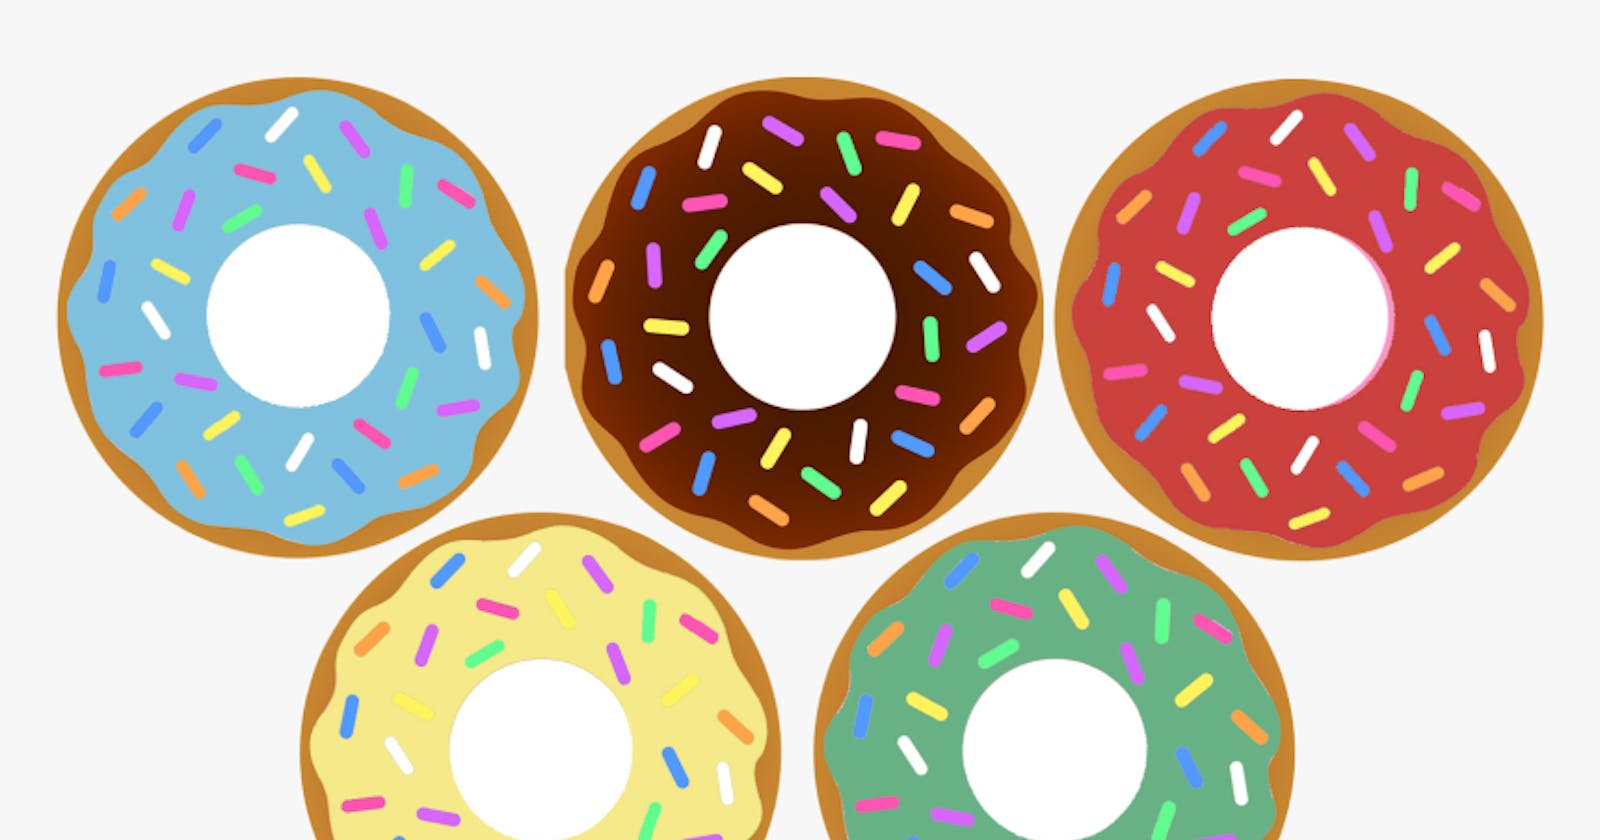 How to draw Donut Chart using Google Charts in Angular ?